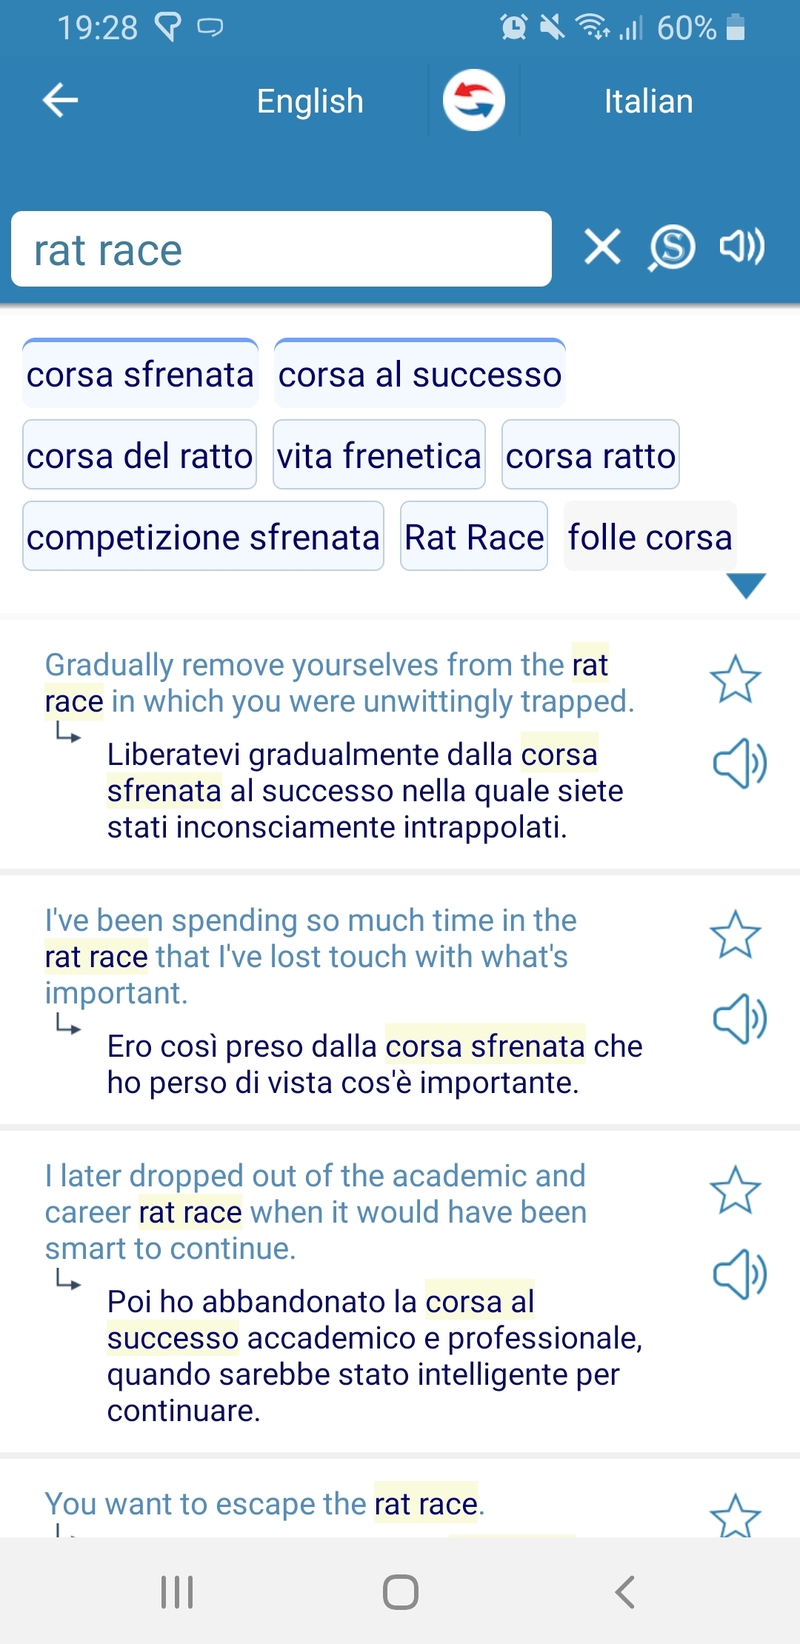 what does vita frenetica mean is it similar to the english word rat race.  do italian folk also use it like we american folks. we commonly use a rat  race to describe